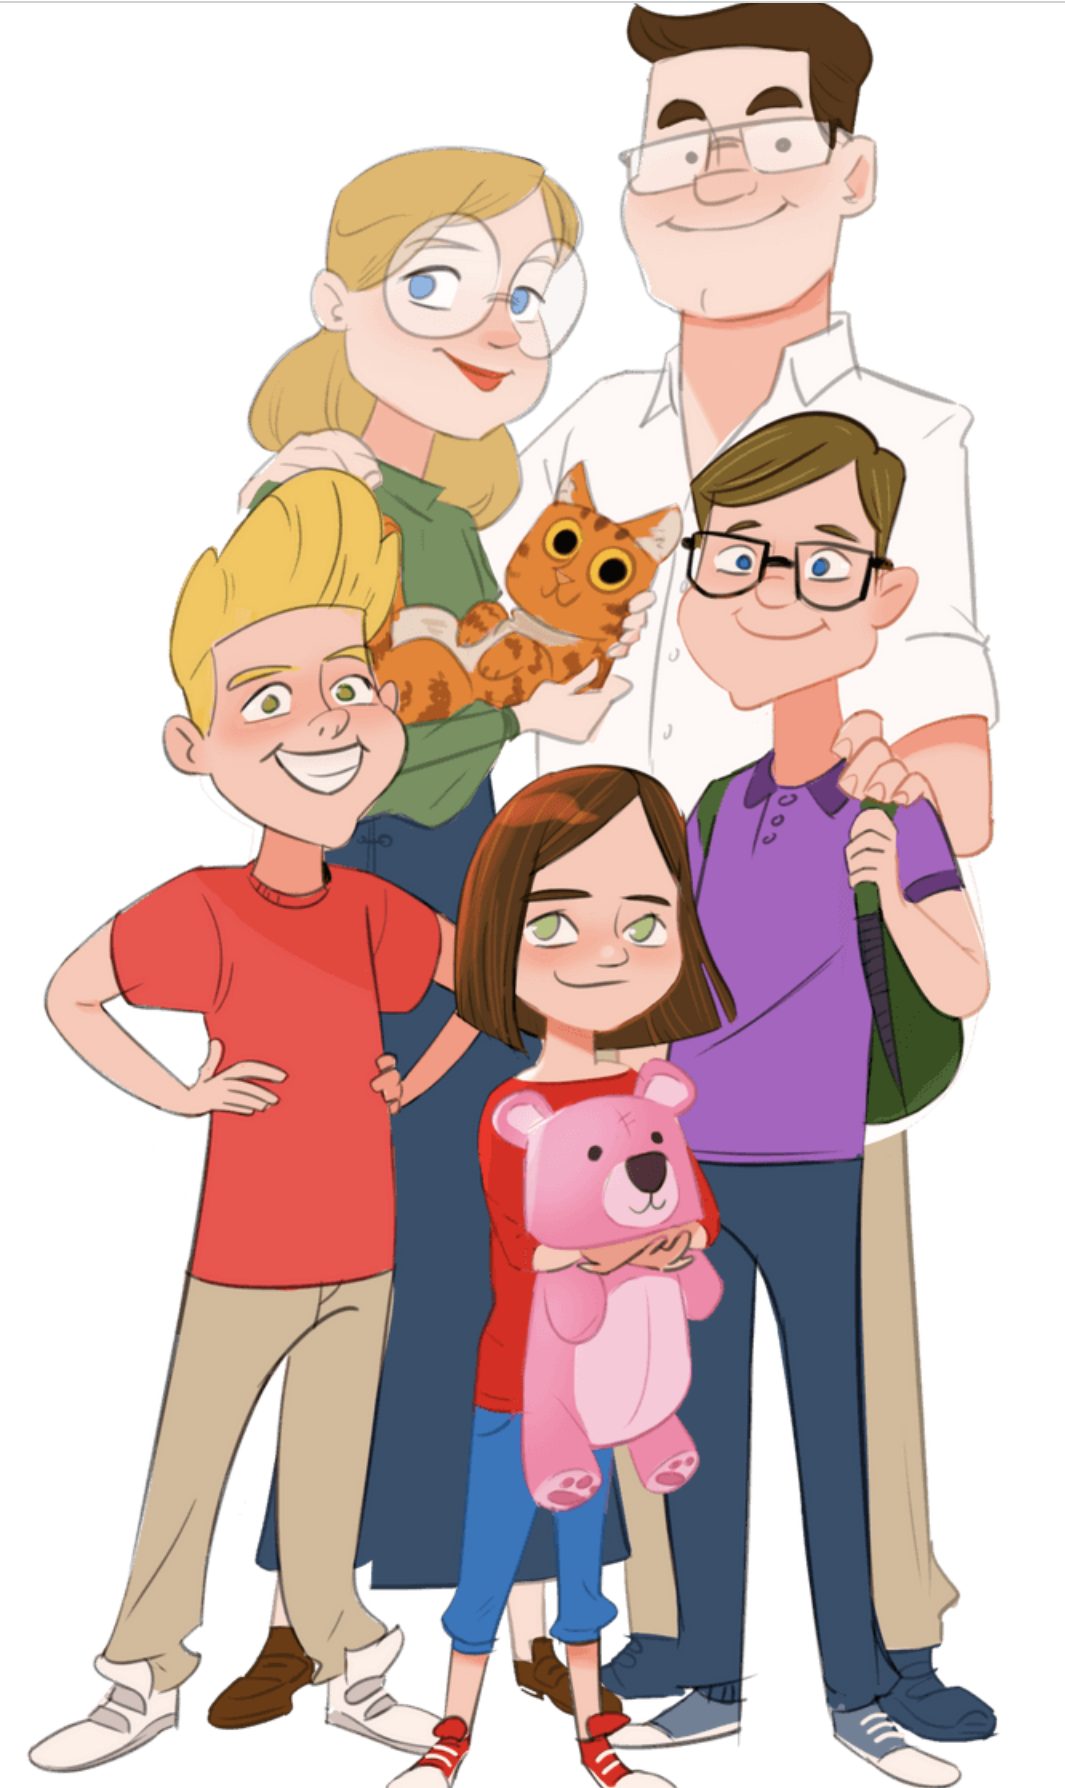 lds primary clipart families are forever